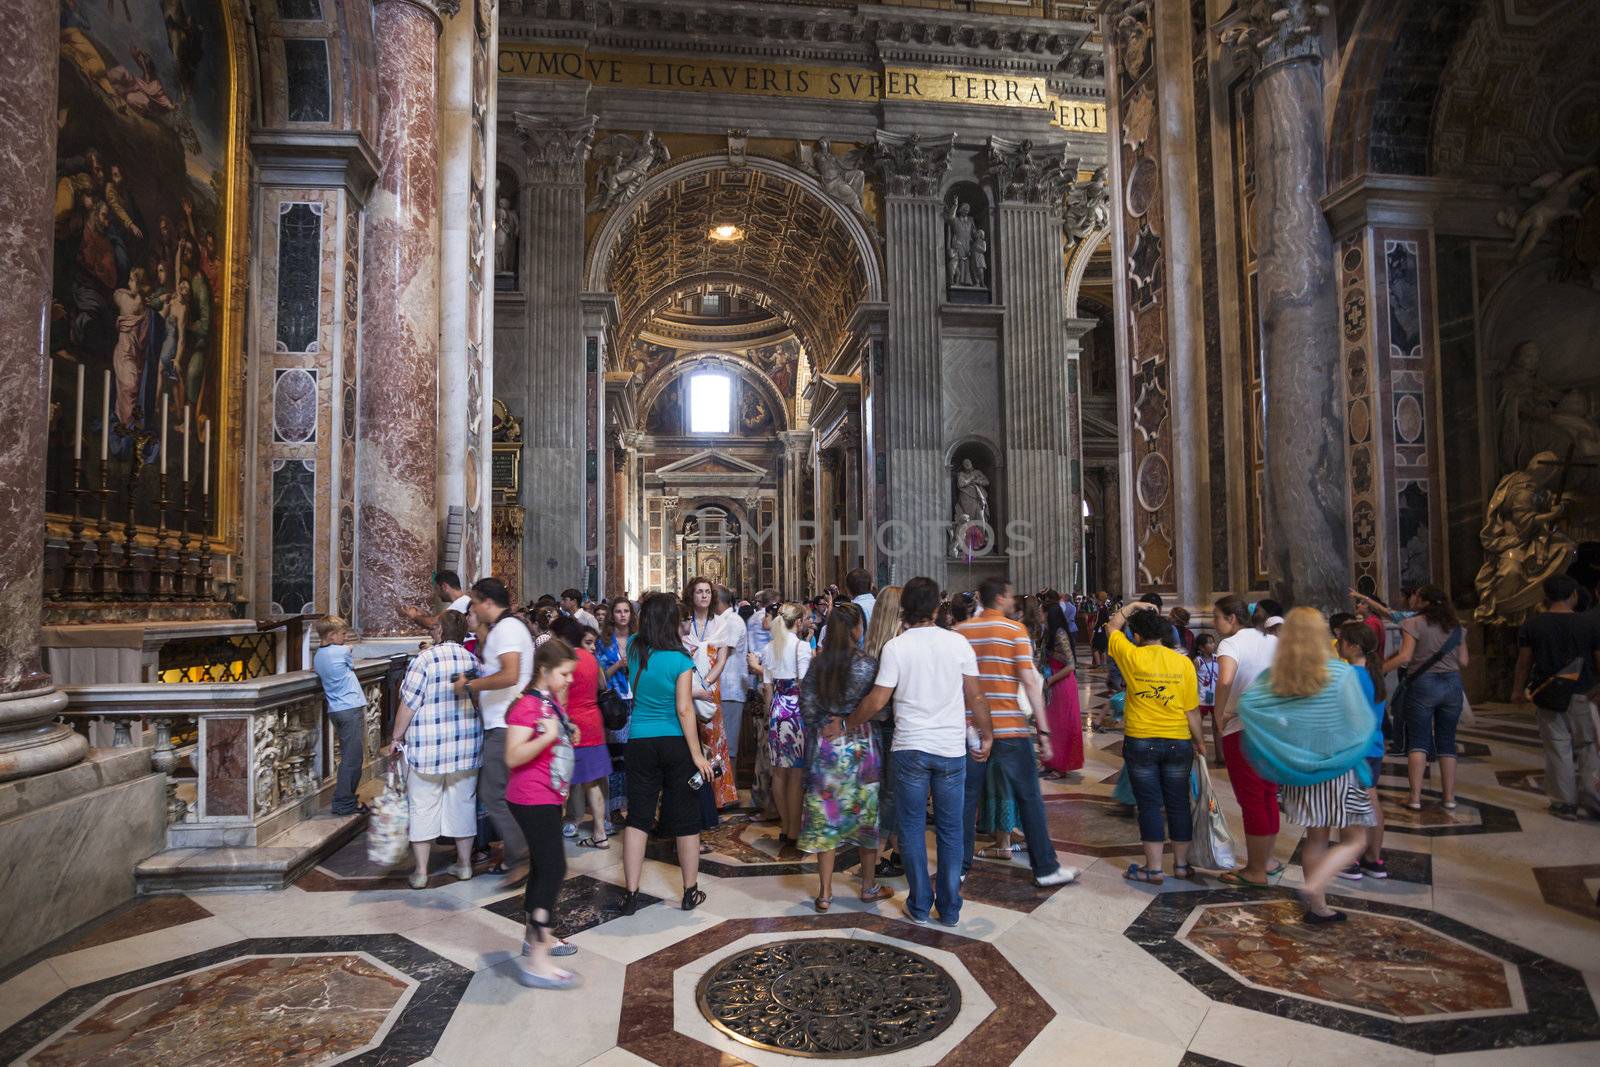 ROME - June 22: Crowd of tourists Indoor St. Peter's Basilica on June 22, 2012 in Rome, Italy. St. Peter's Basilica is a Late Renaissance church one of largest Christian church in world